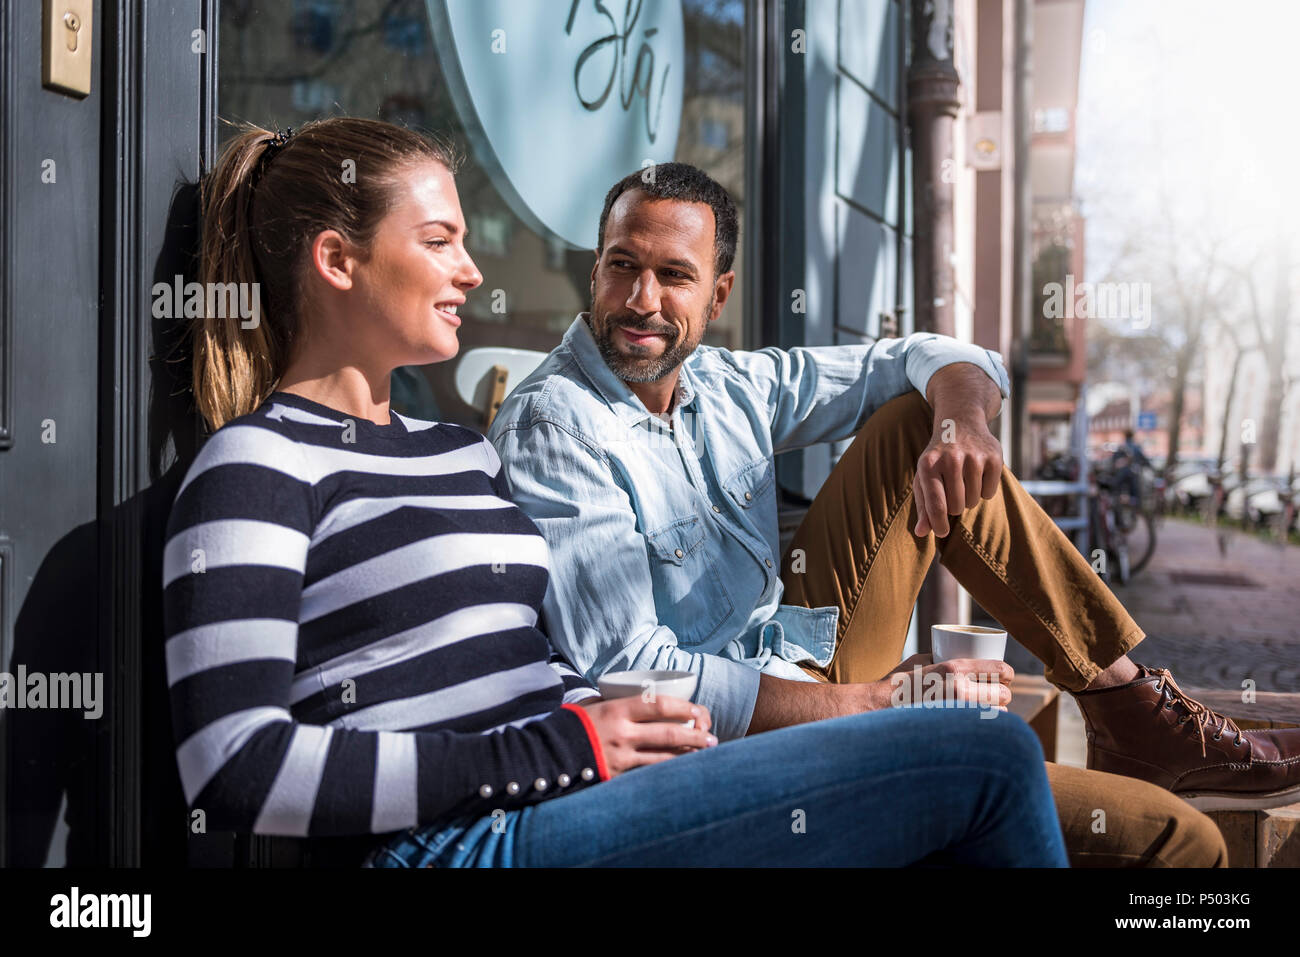 Man and woman sitting outside a cafe talking Stock Photo